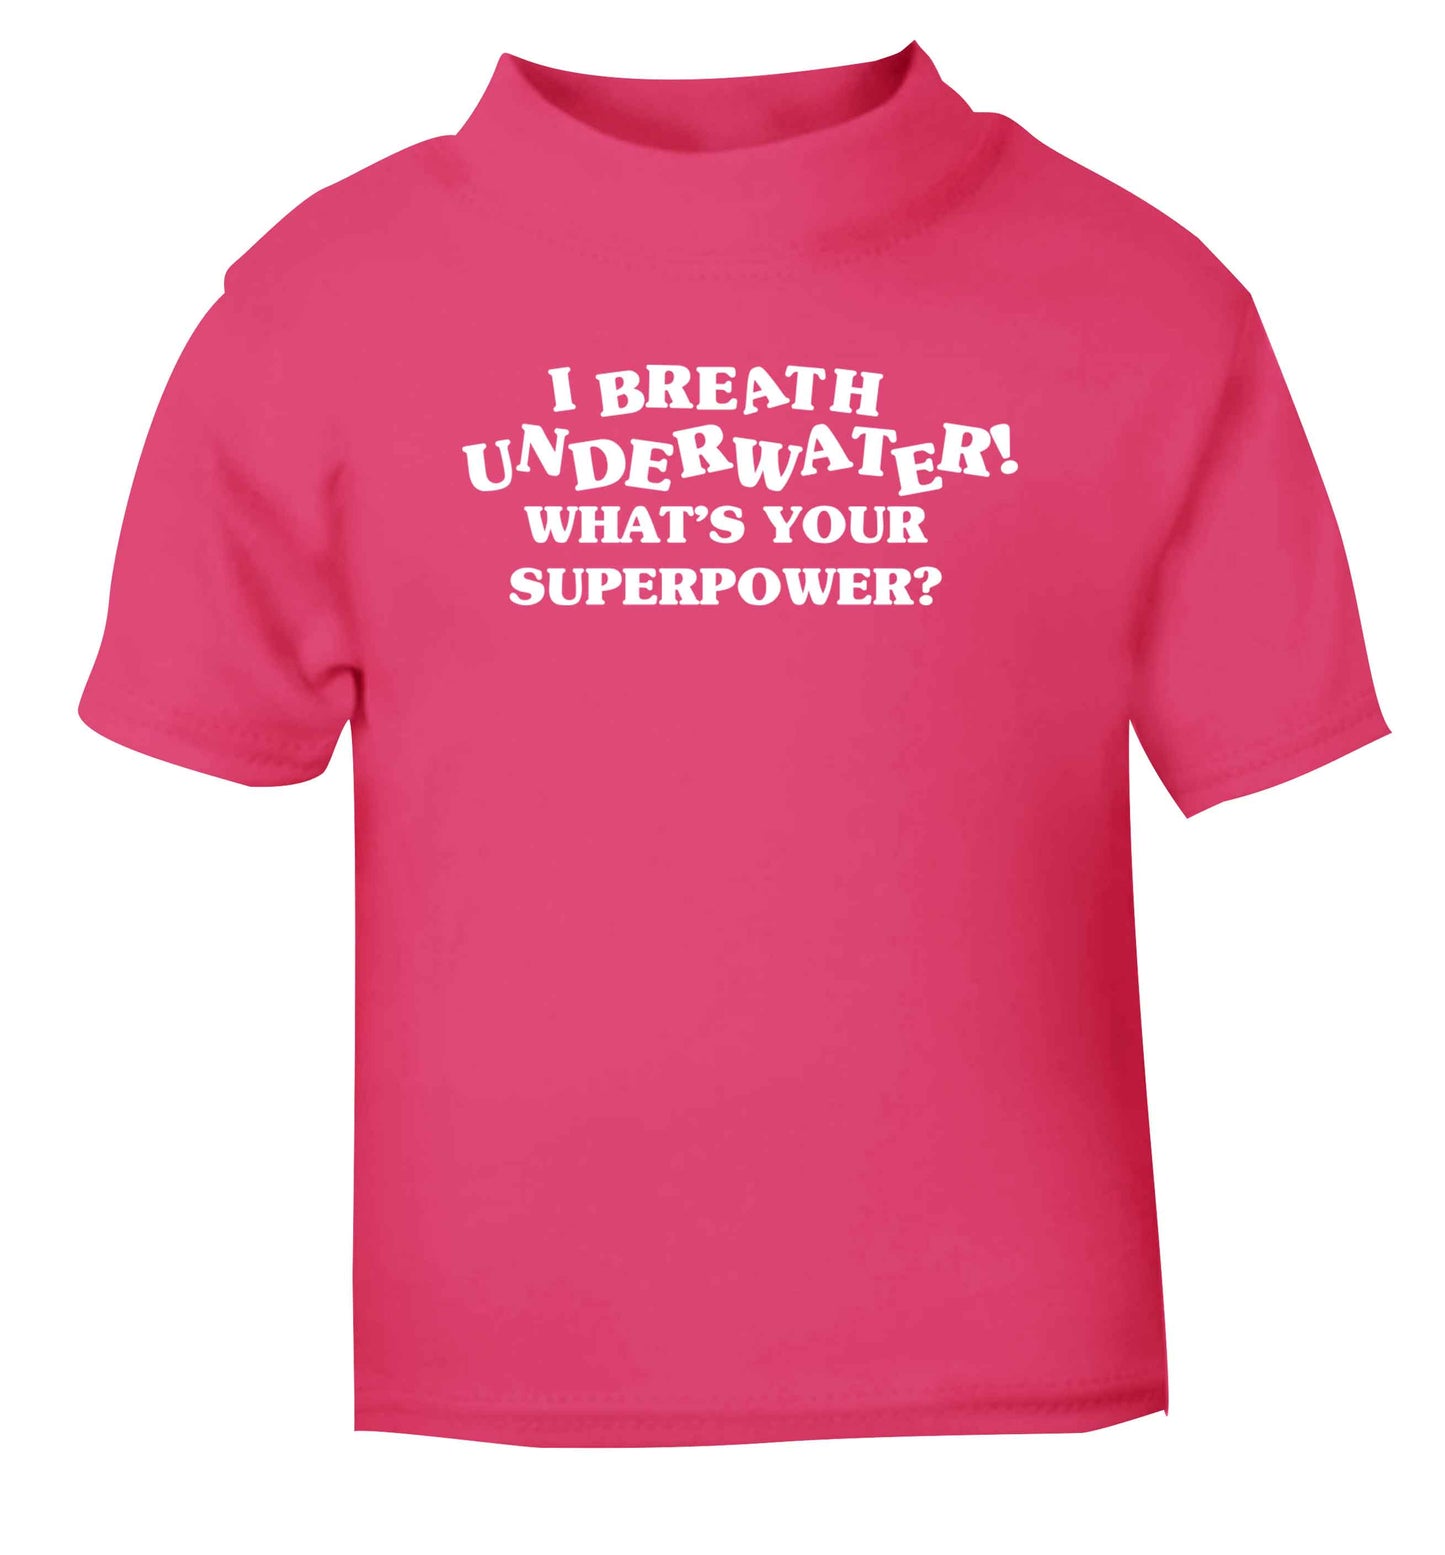 I breath underwater what's your superpower? pink Baby Toddler Tshirt 2 Years